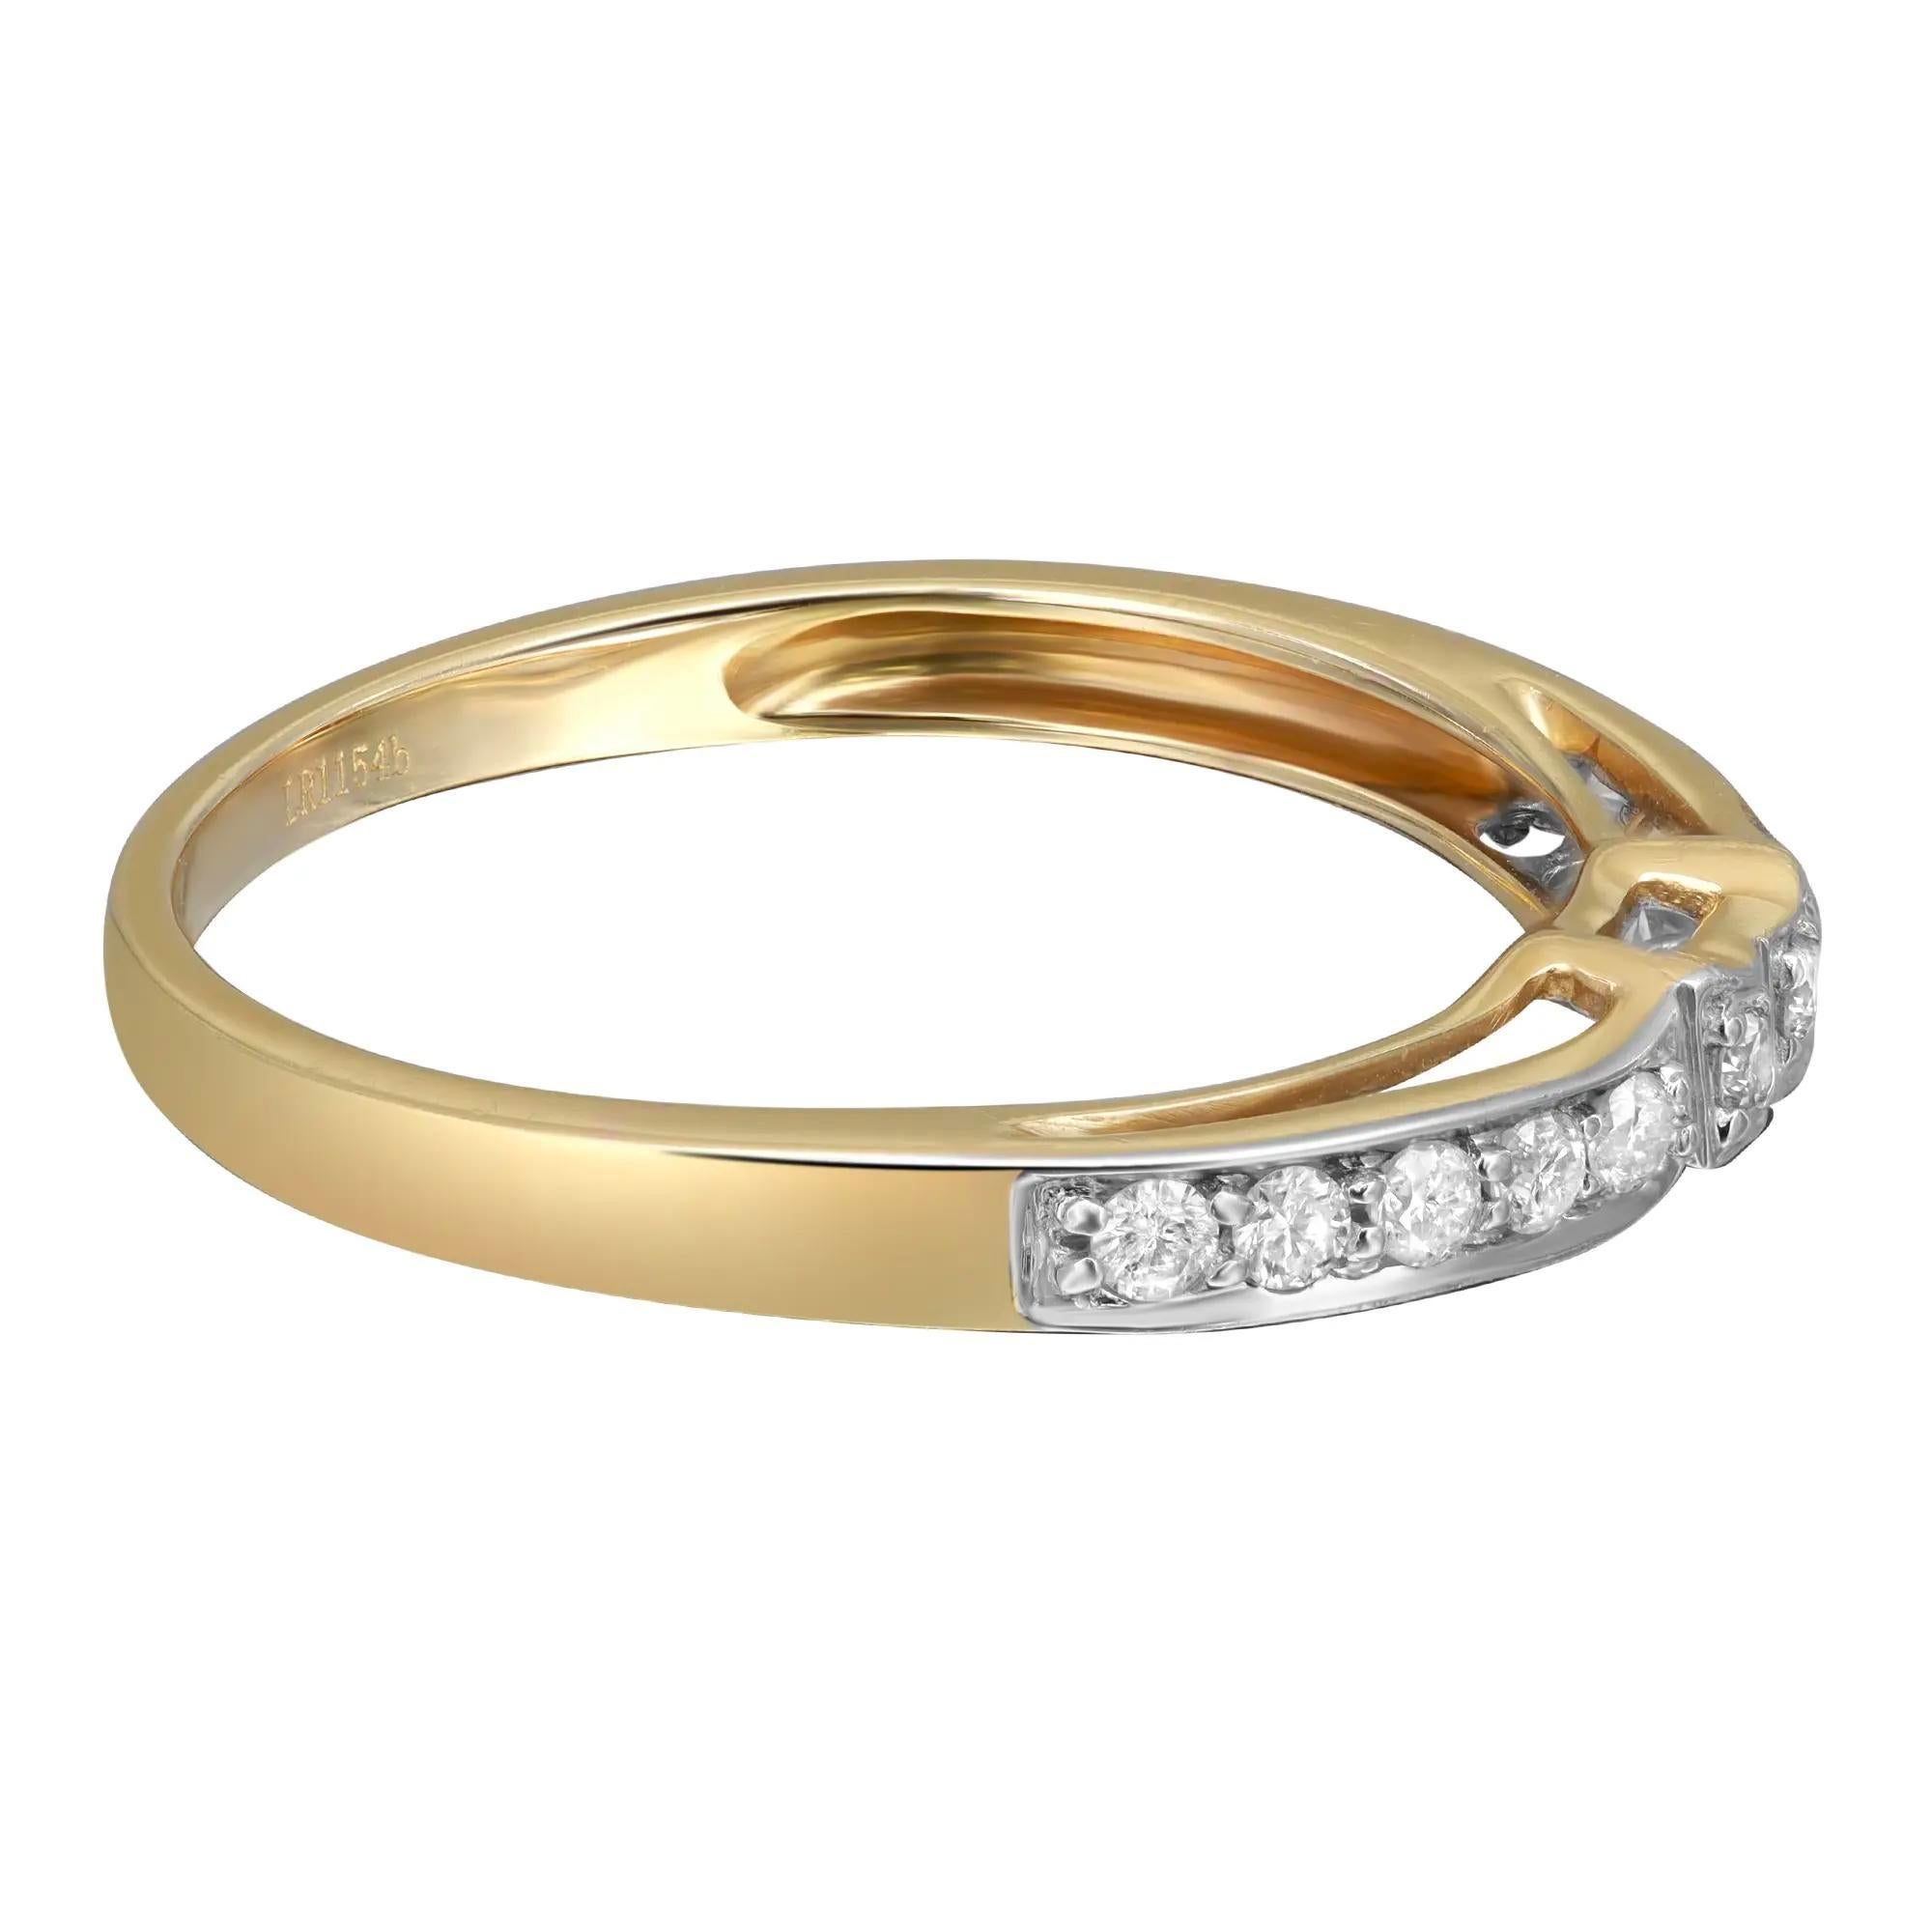 0.37cttw Pave Set Round Cut Diamond Petite Band Ring 14k Yellow Gold In New Condition For Sale In New York, NY